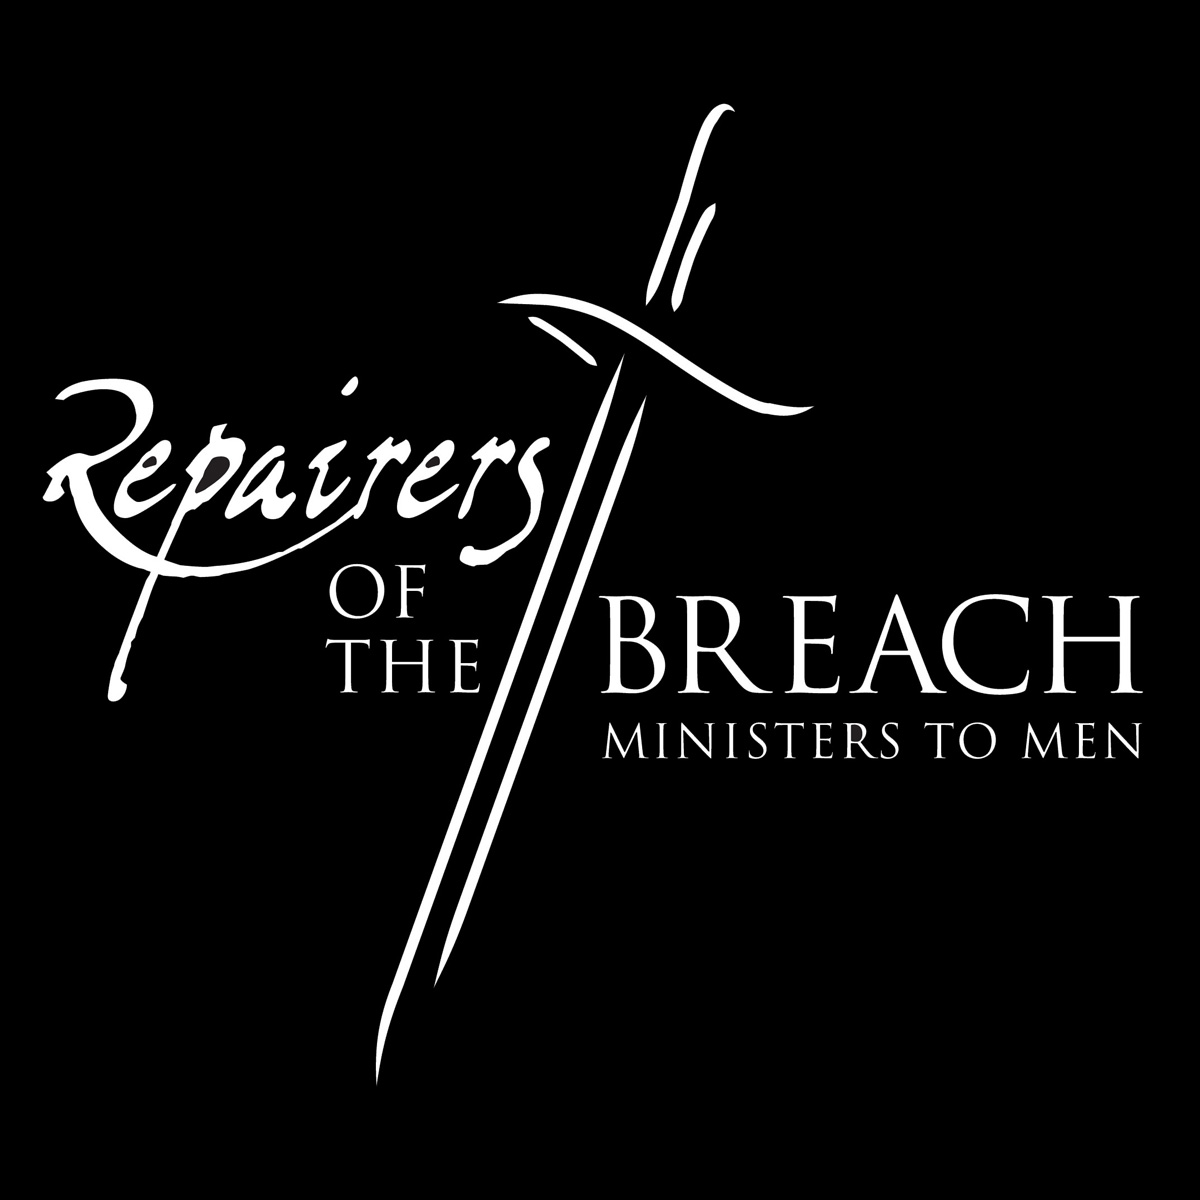 Repairers of the Breach Conference 2012 session 4 - Pastor Mosa Sono